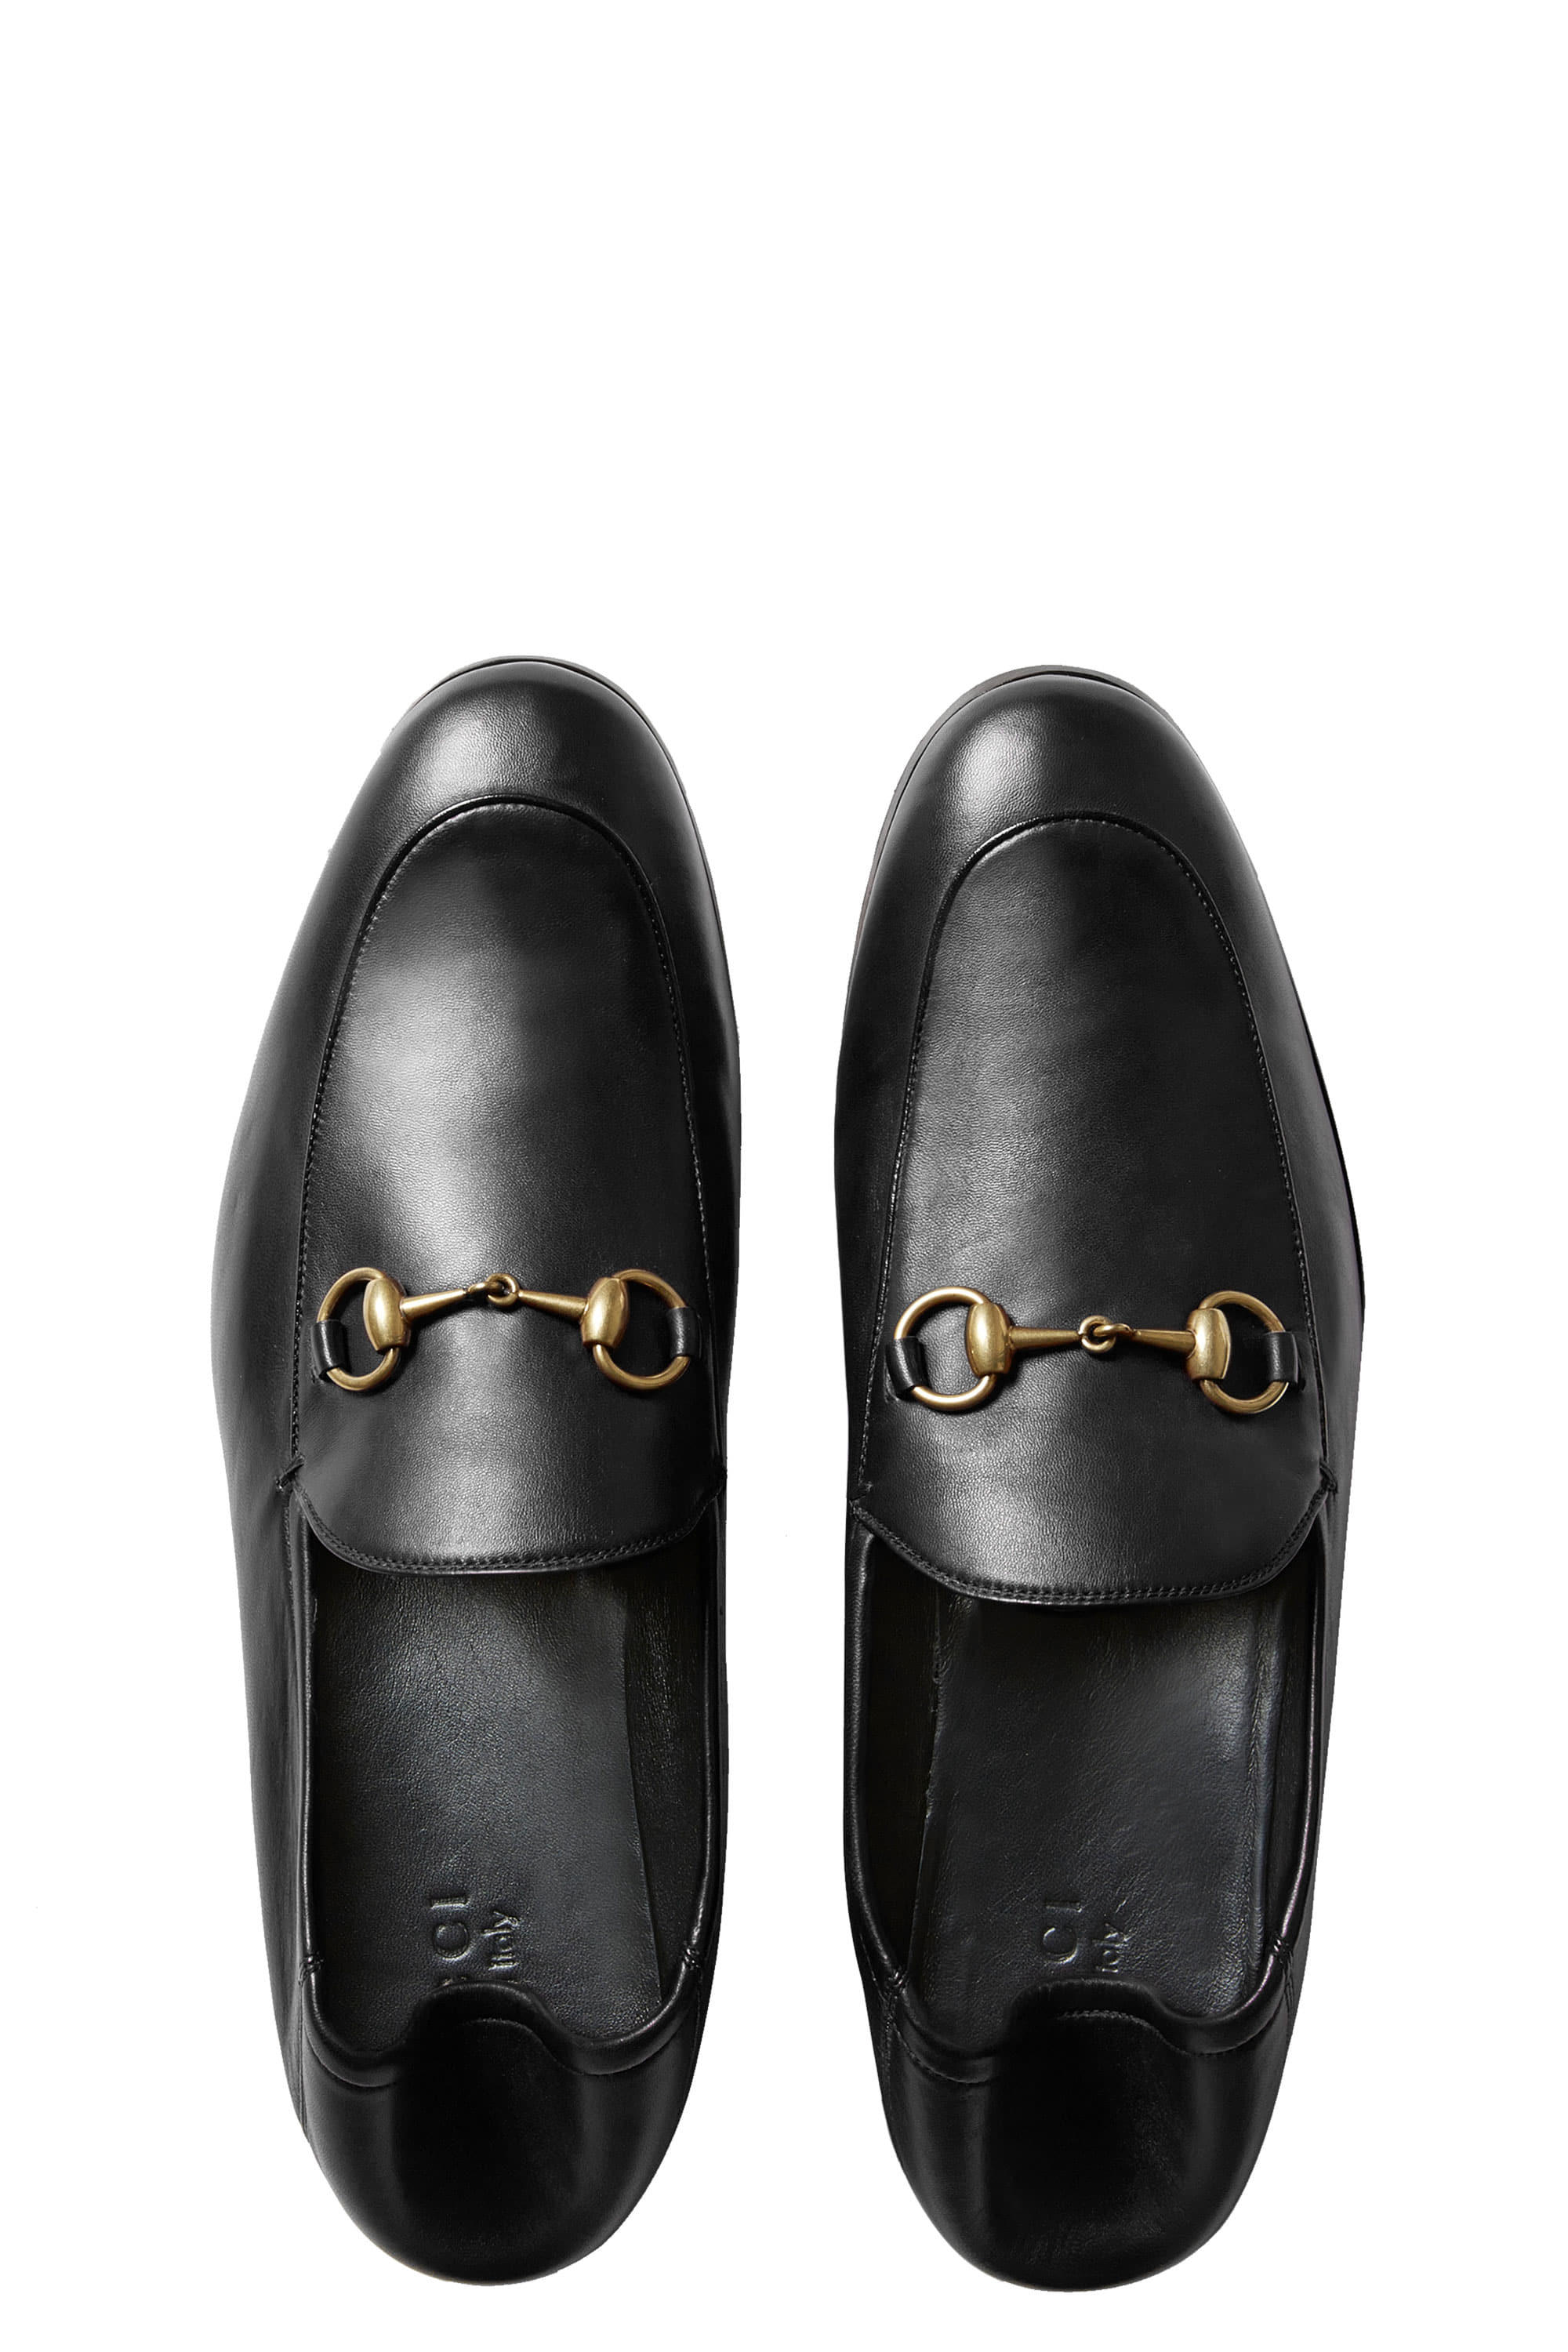 Horsebit Loafer -italy leather-